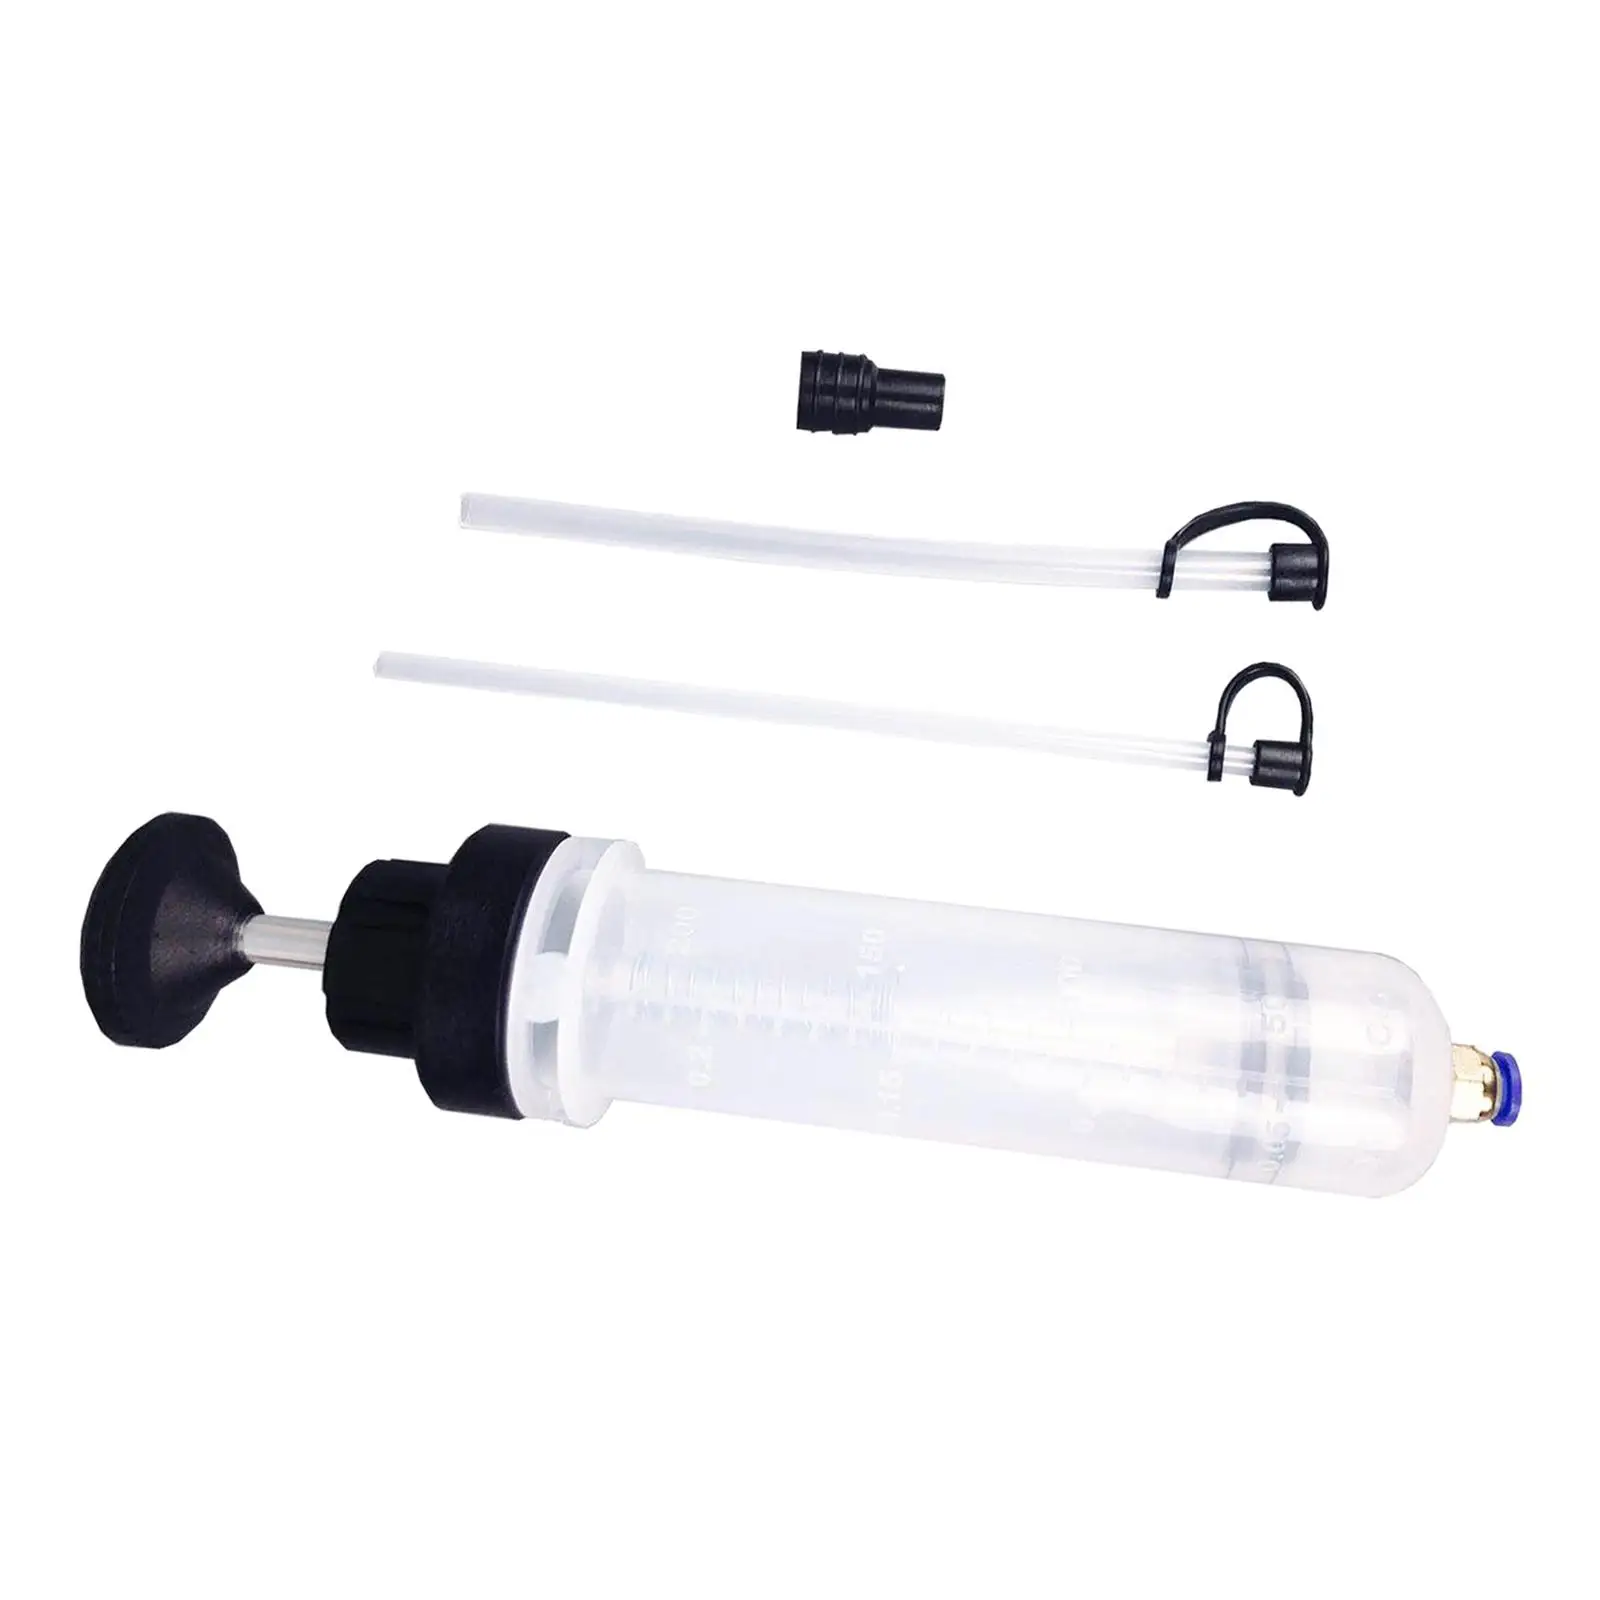 200CC Car Oil Fluid Extractor Oil Filling Syringe Delivery Bottle Transfer Liquid Pump Fluid Extraction Oil Extractor Tool Kit